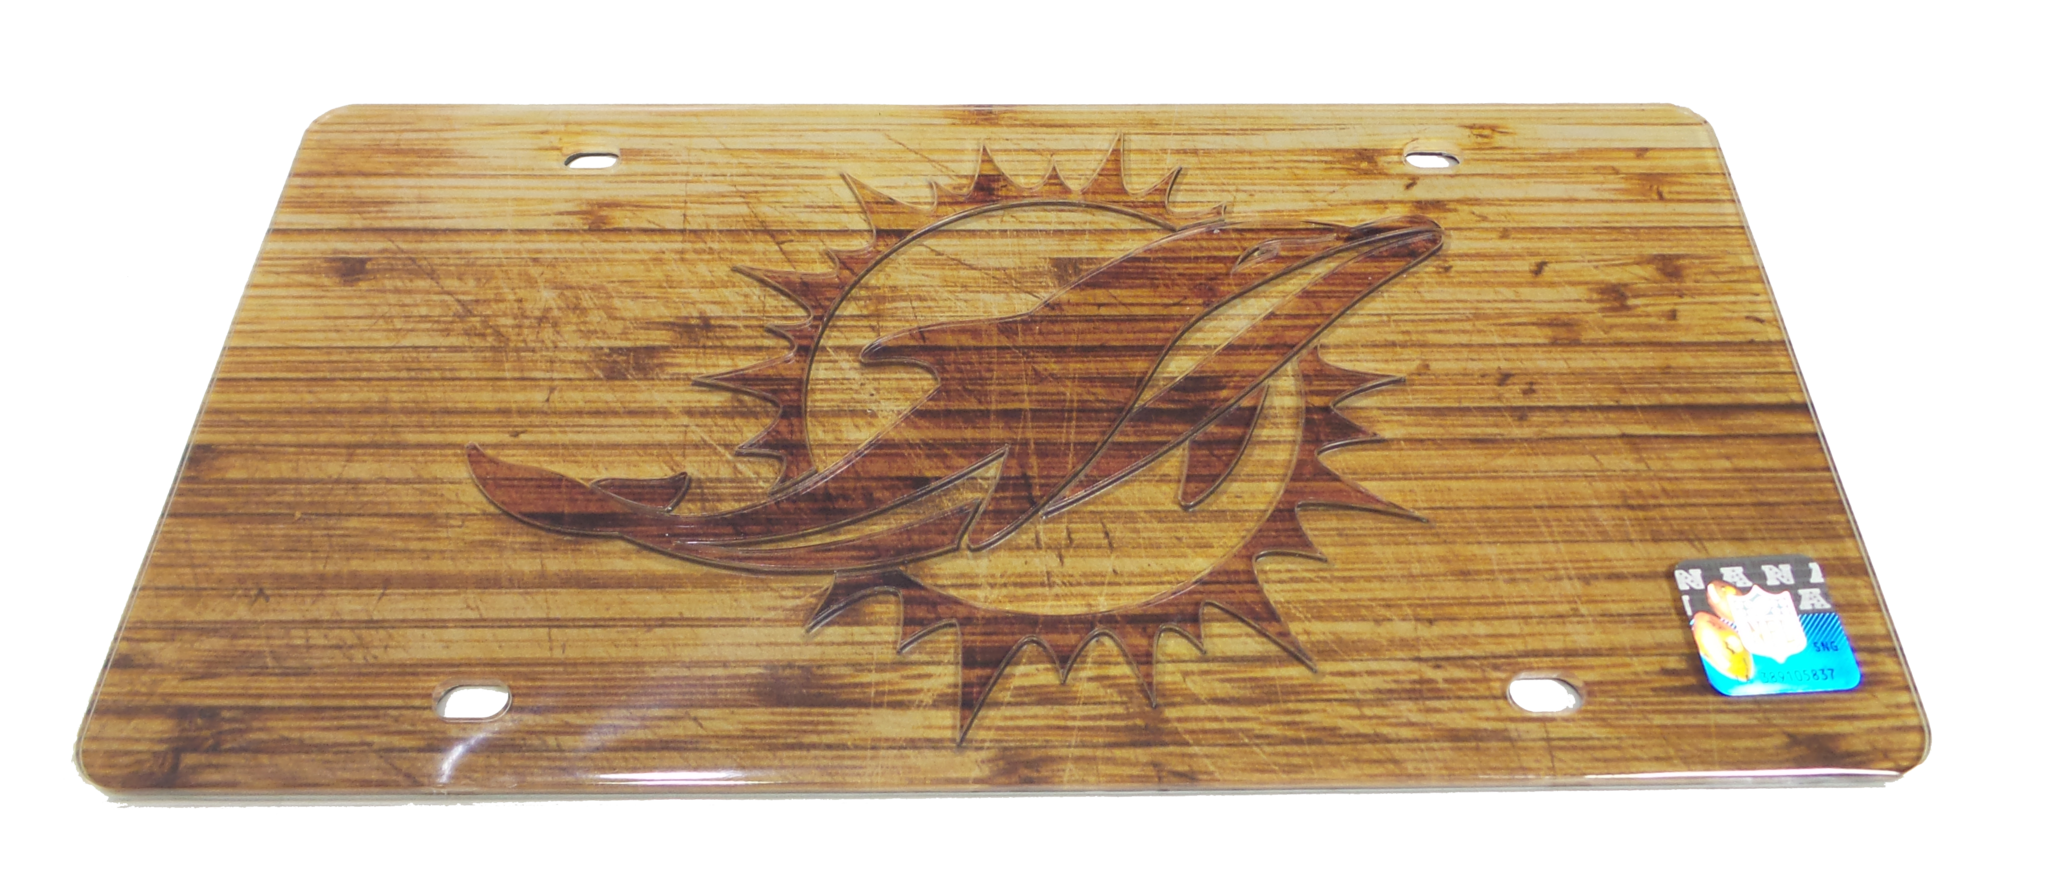 Miami Dolphins Front License Plate Tag - Wood - CanesWear at Miami FanWear Automobile Accessories Stockdale CanesWear at Miami FanWear